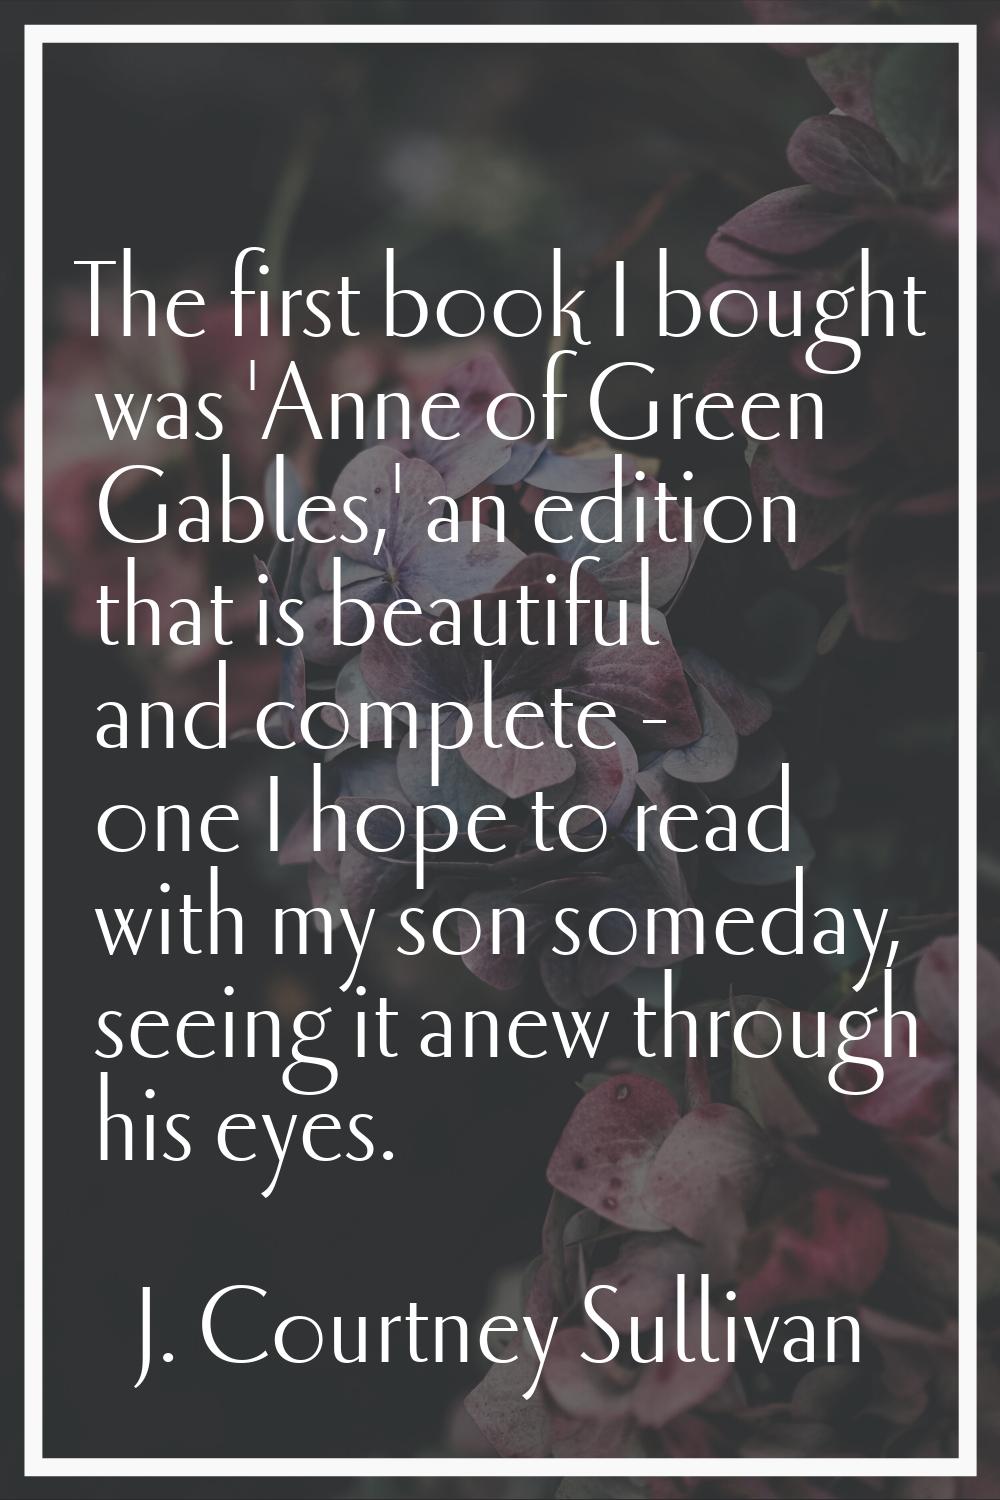 The first book I bought was 'Anne of Green Gables,' an edition that is beautiful and complete - one